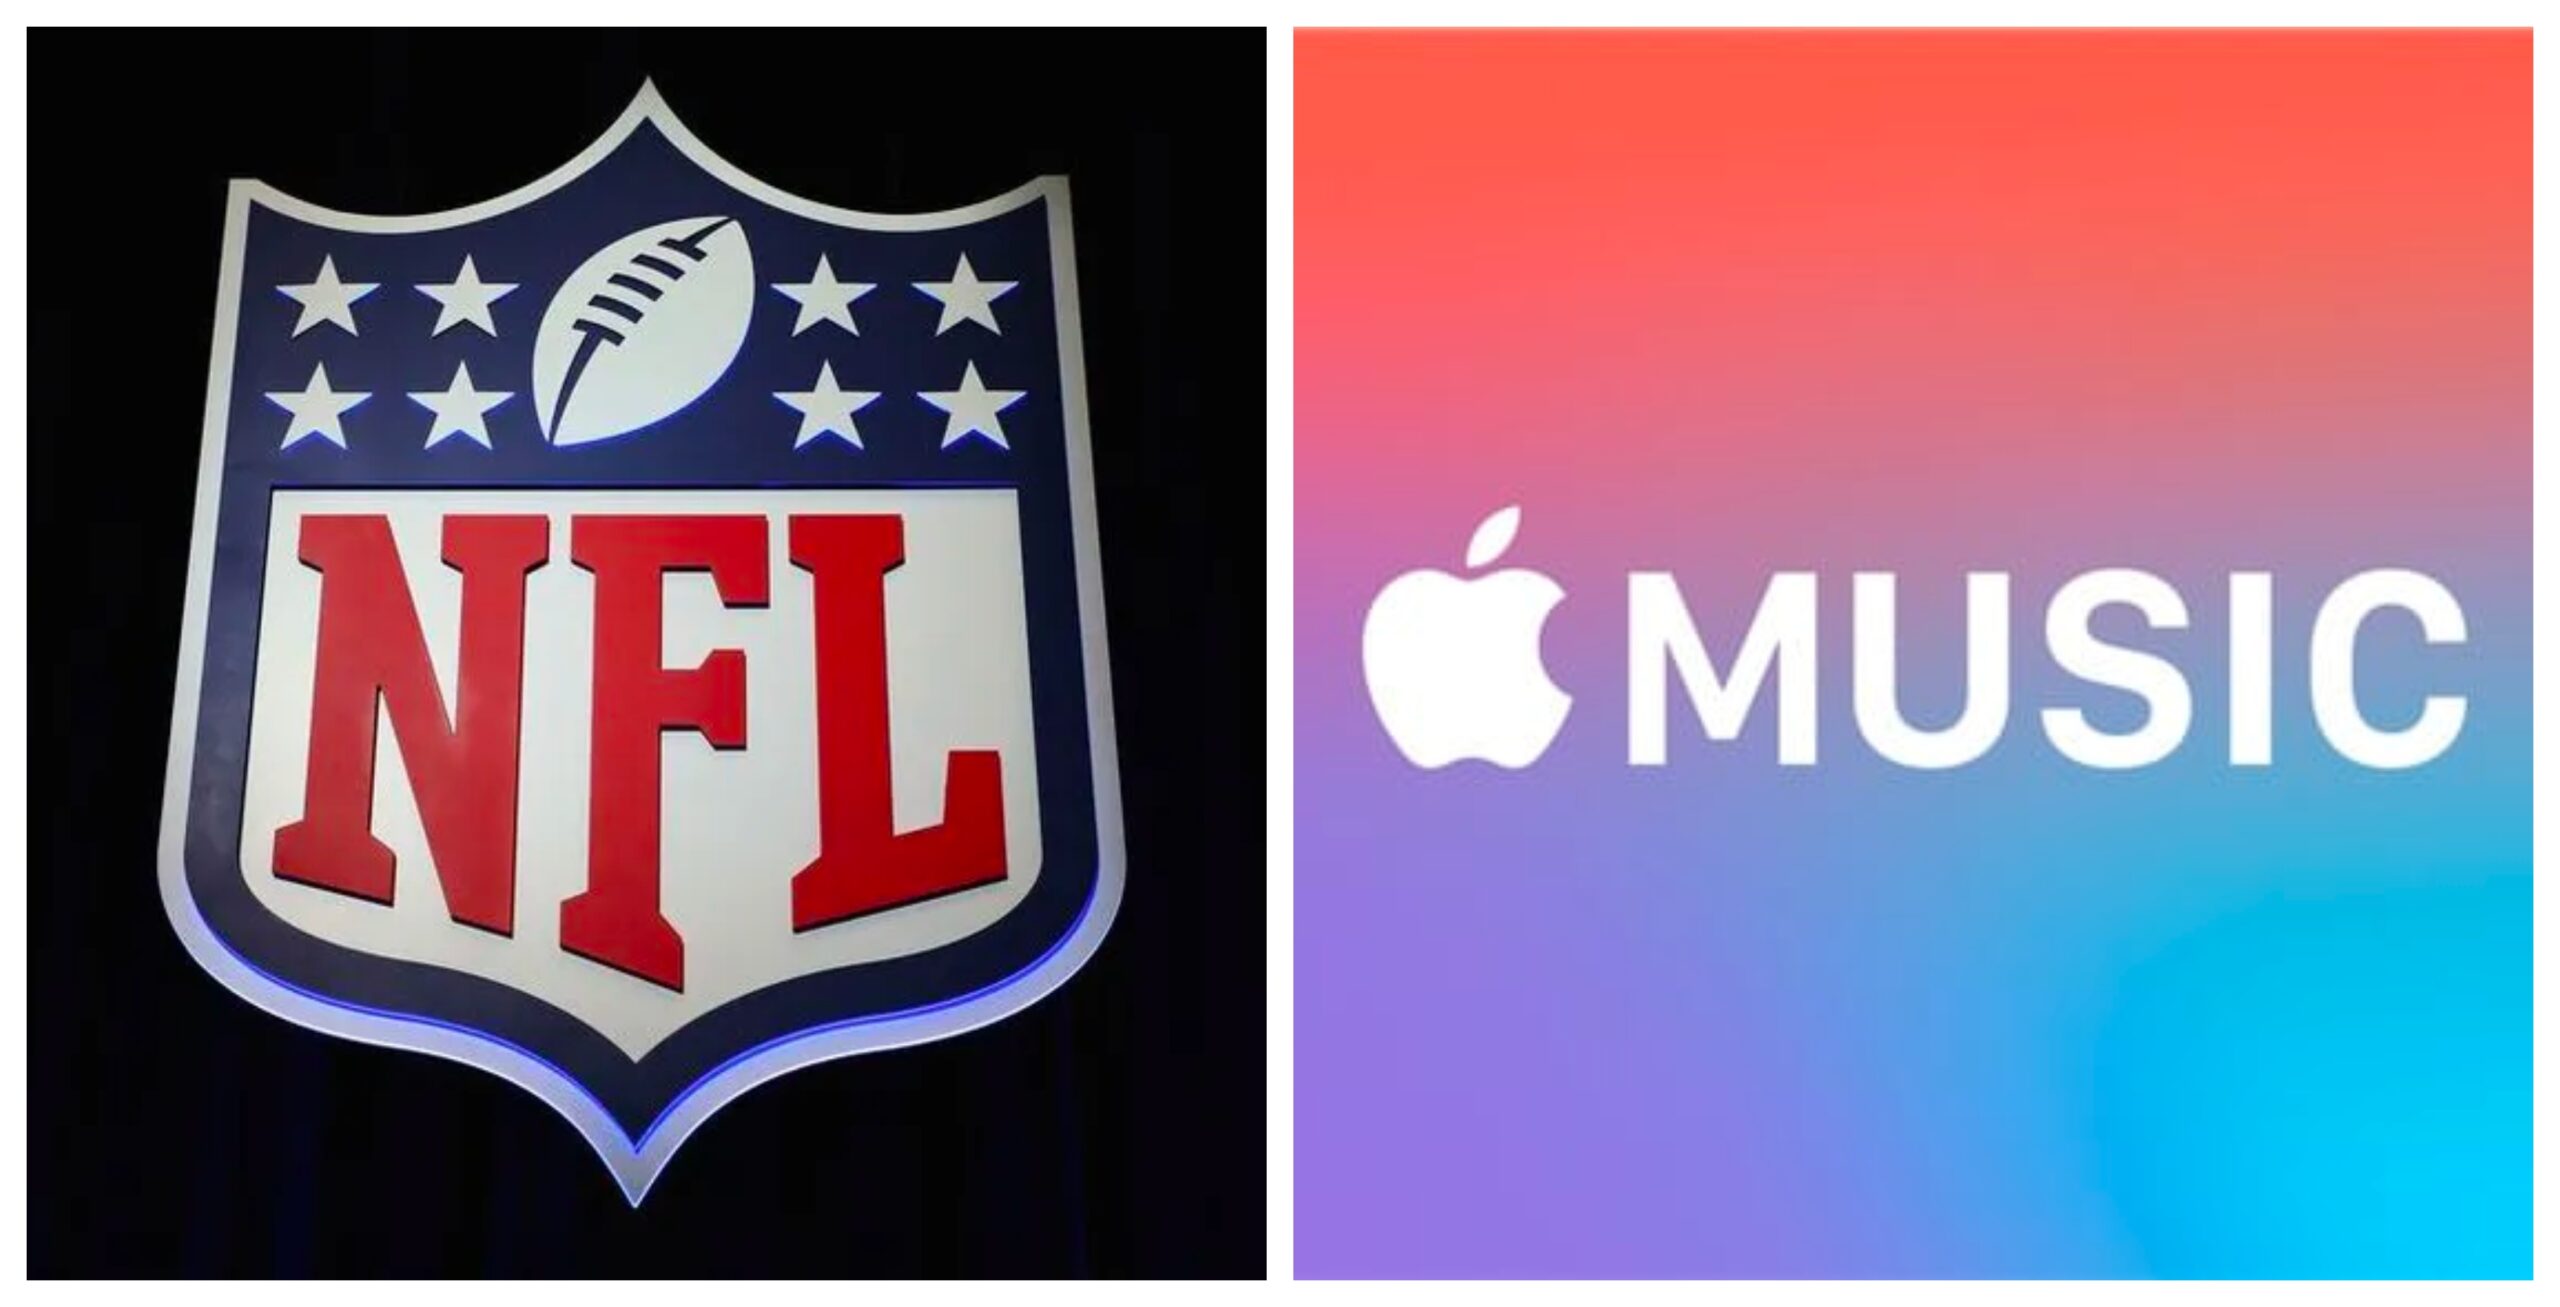 Apple will sponsor Super Bowl halftime show starting in February